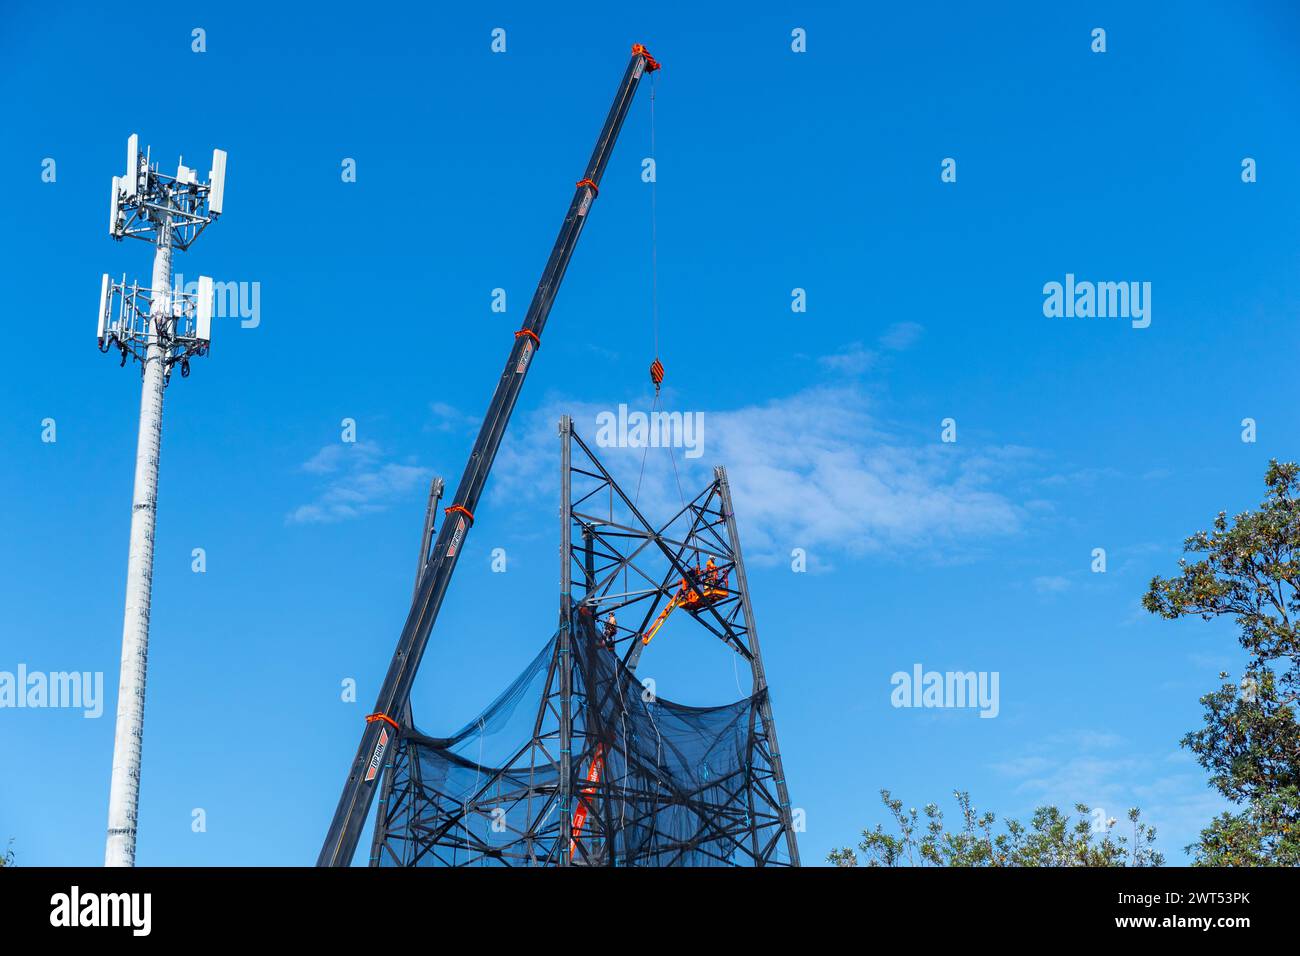 Waverley Communication Tower in Australia is being demolished. Constructed in 1945, it played a critical role in NASA's 1969 Apollo 11 moon landing. Stock Photo